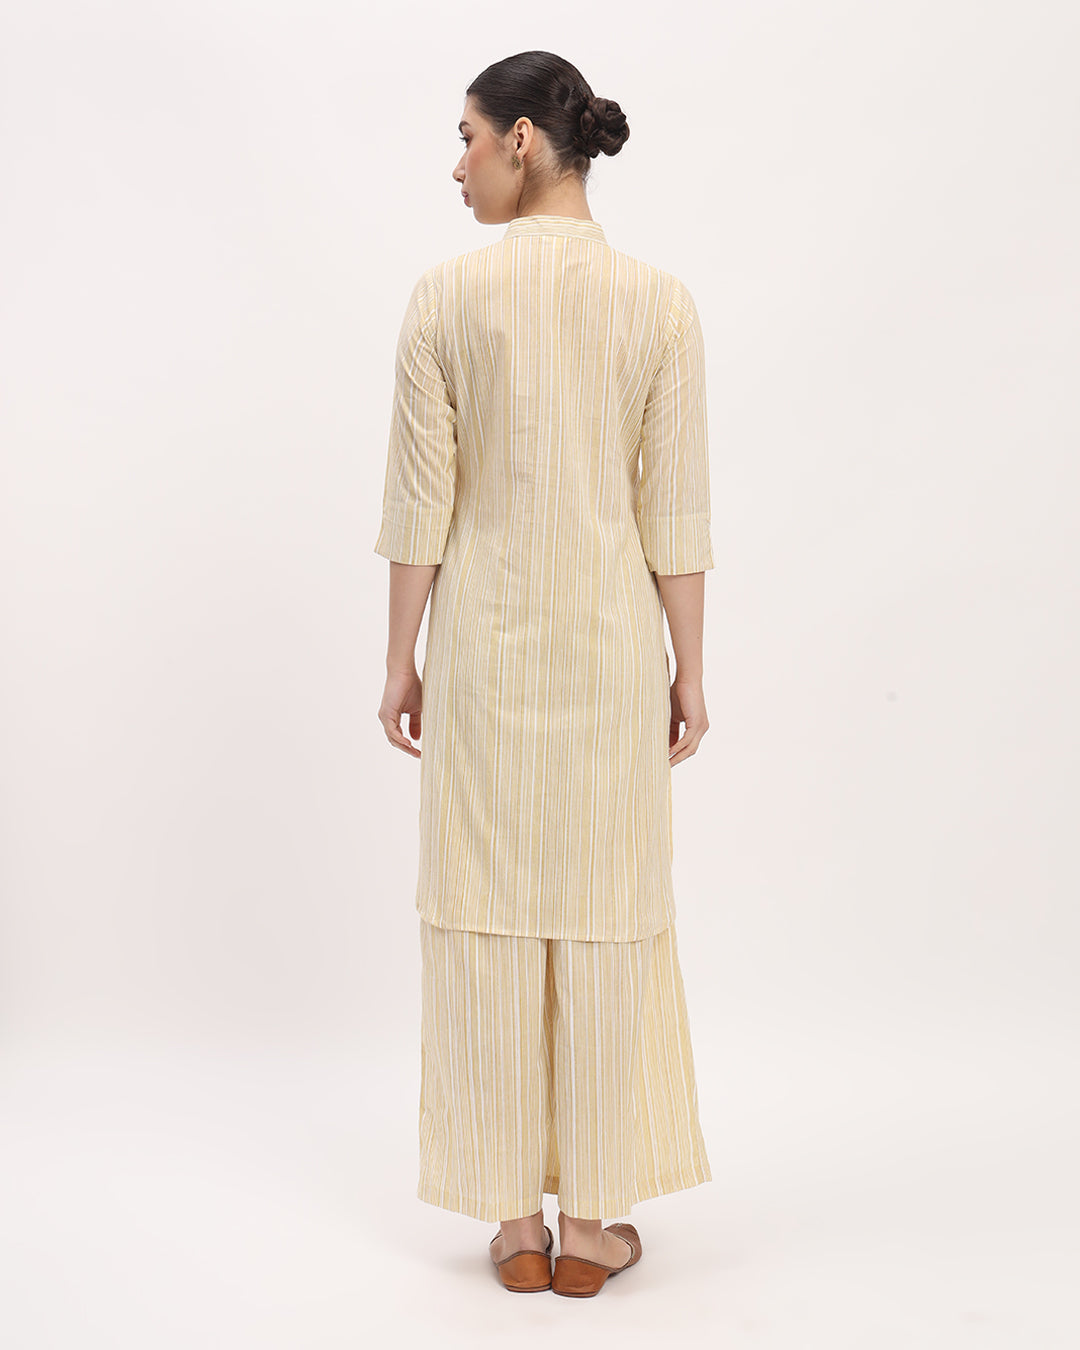 Combo: Maple Leaf & Yellow Chic Lines Band Collar Neck Printed Kurta (Without Bottoms)